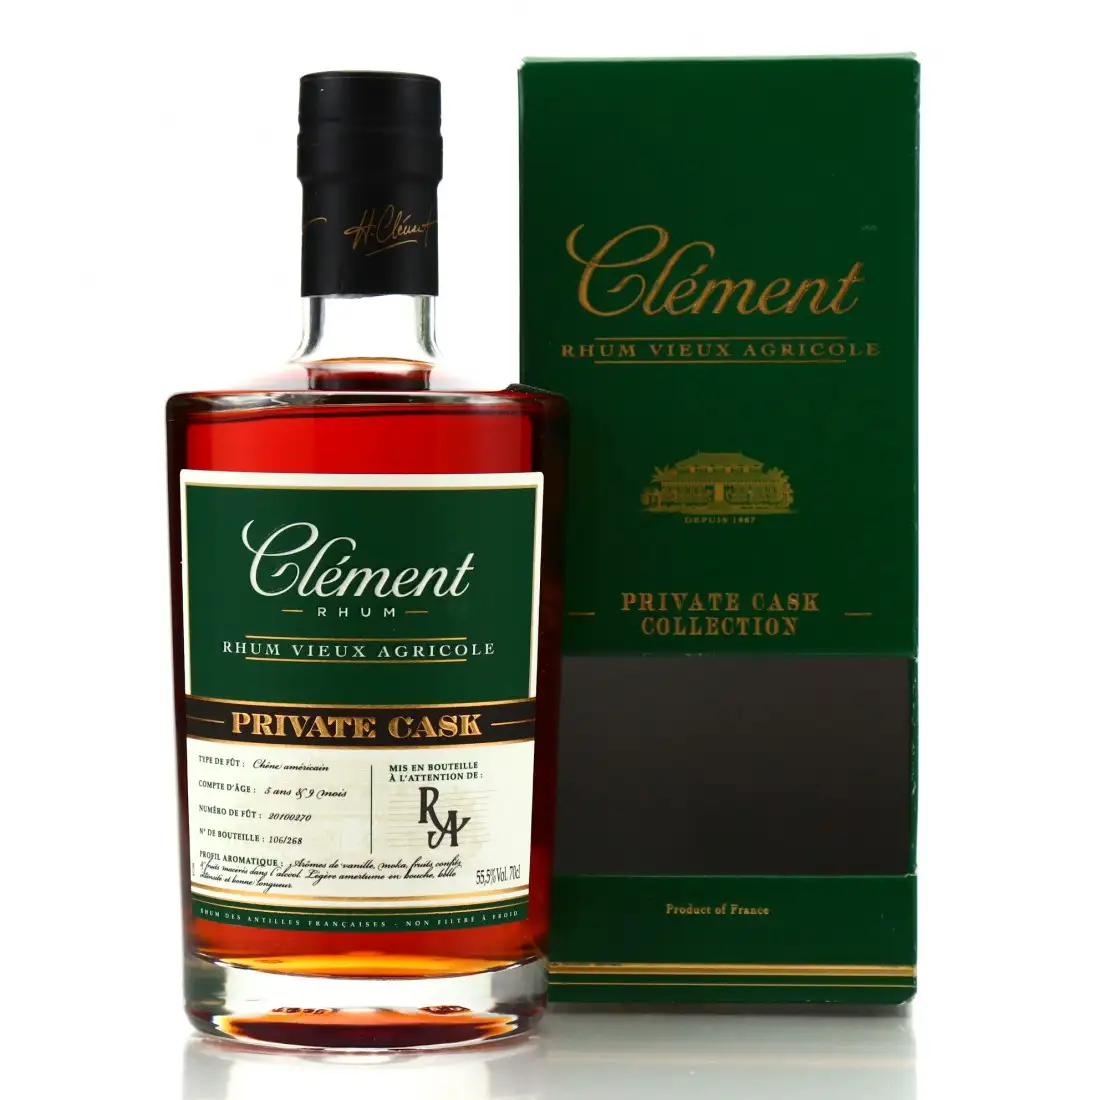 Image of the front of the bottle of the rum Clément Private Cask (Rum Artesanal)